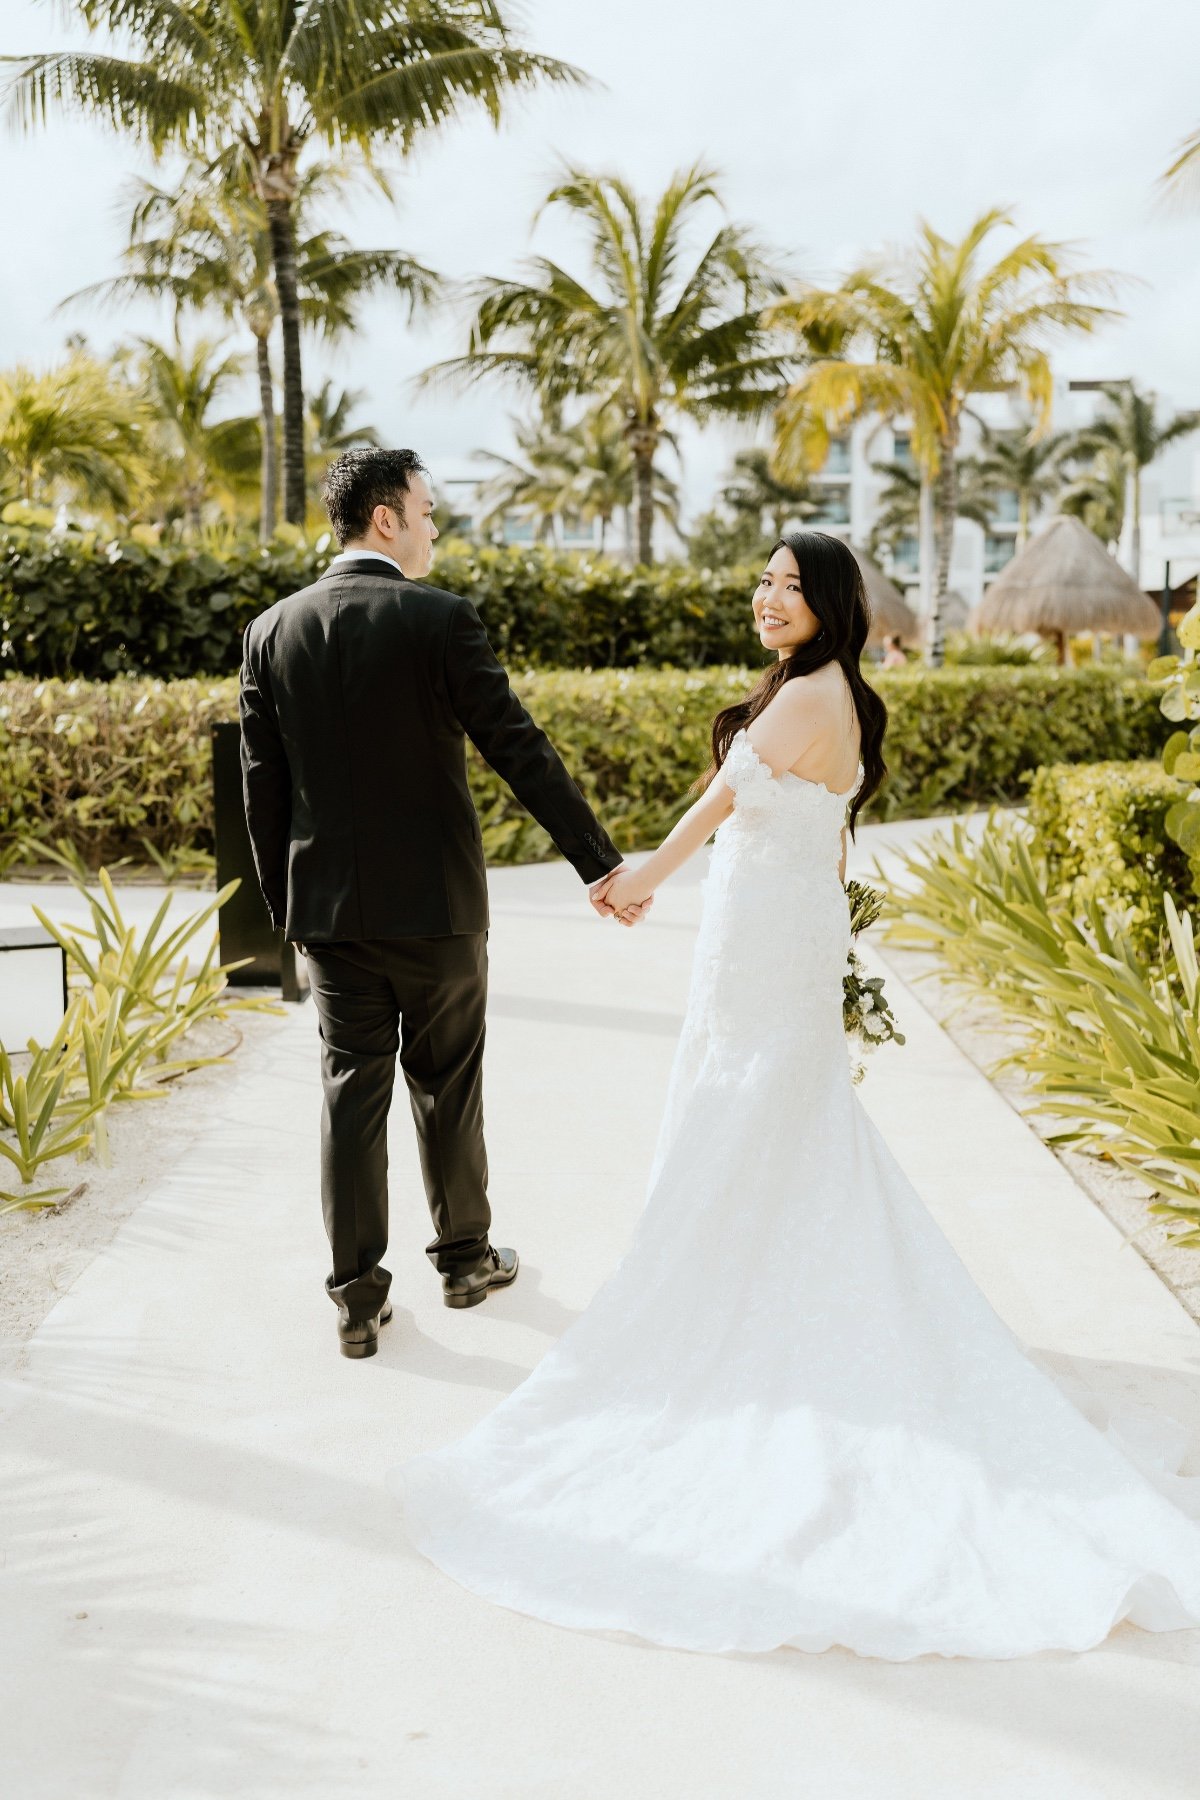 This Picture-Perfect Beachside Wedding In Cancun Holds The Secret Behind Every Successful Wedding Design